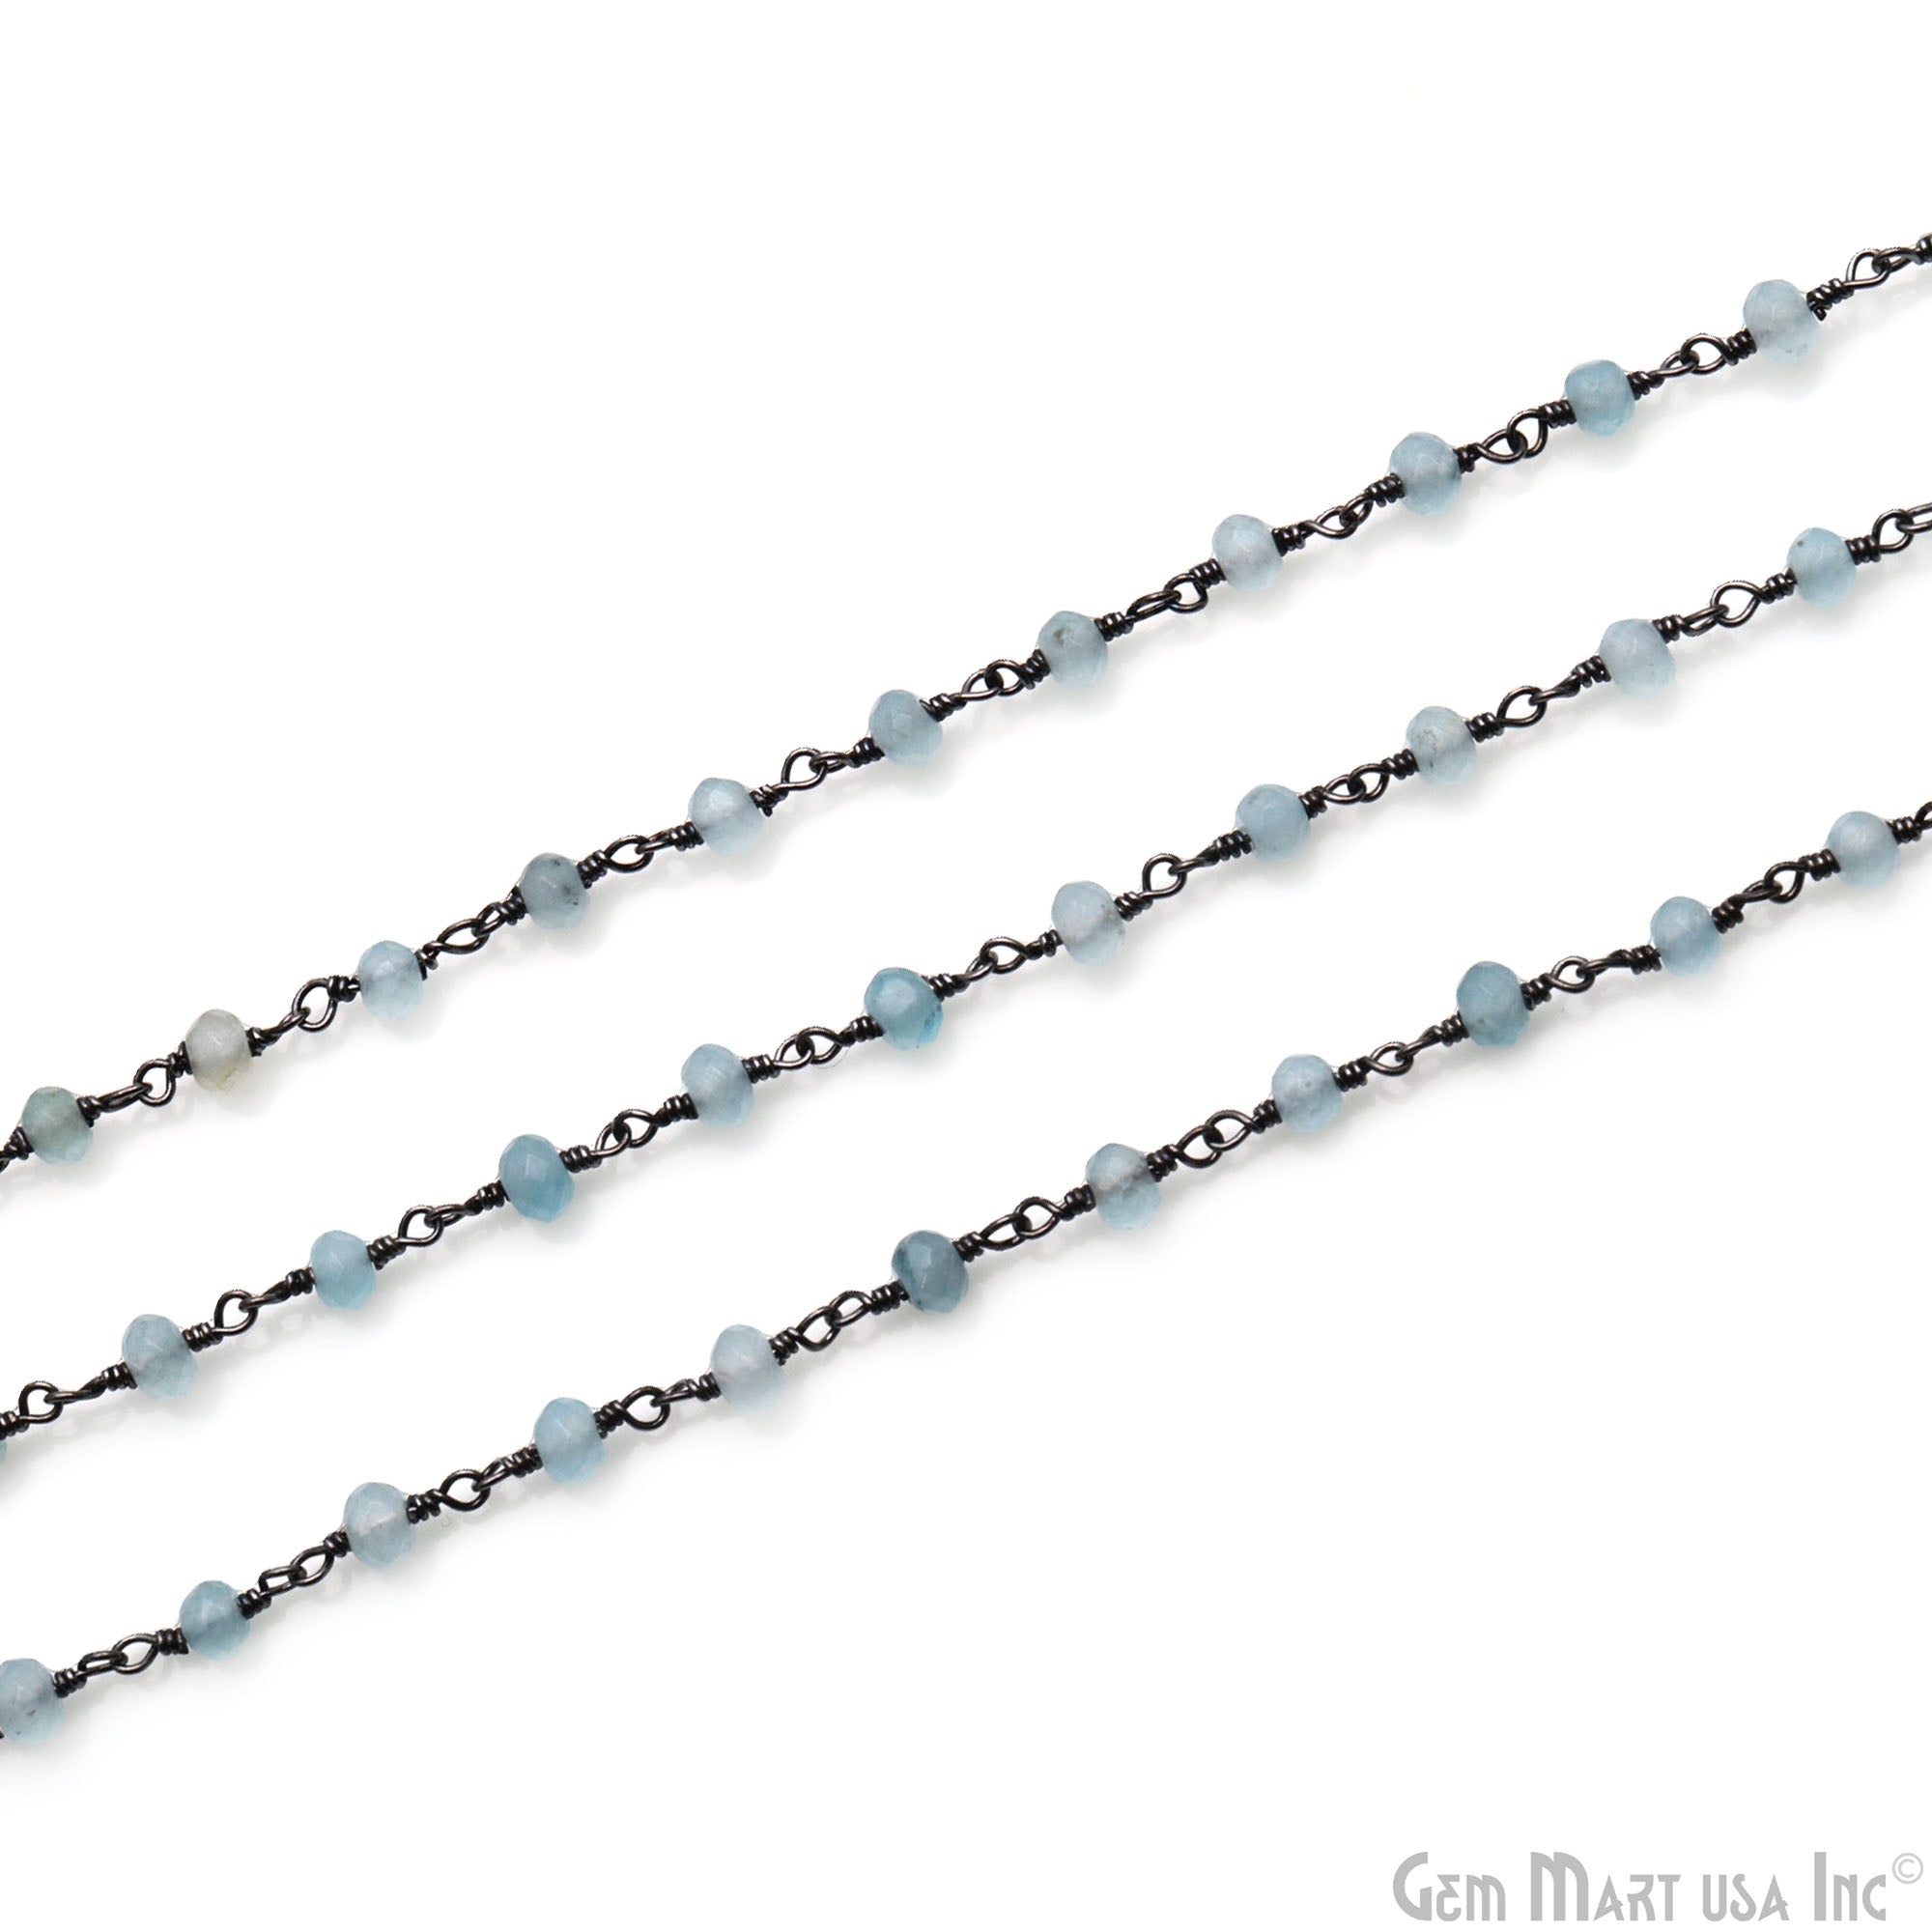 Aqua Jade 4mm Faceted Beads Oxidized Wire Wrapped Rosary Chain